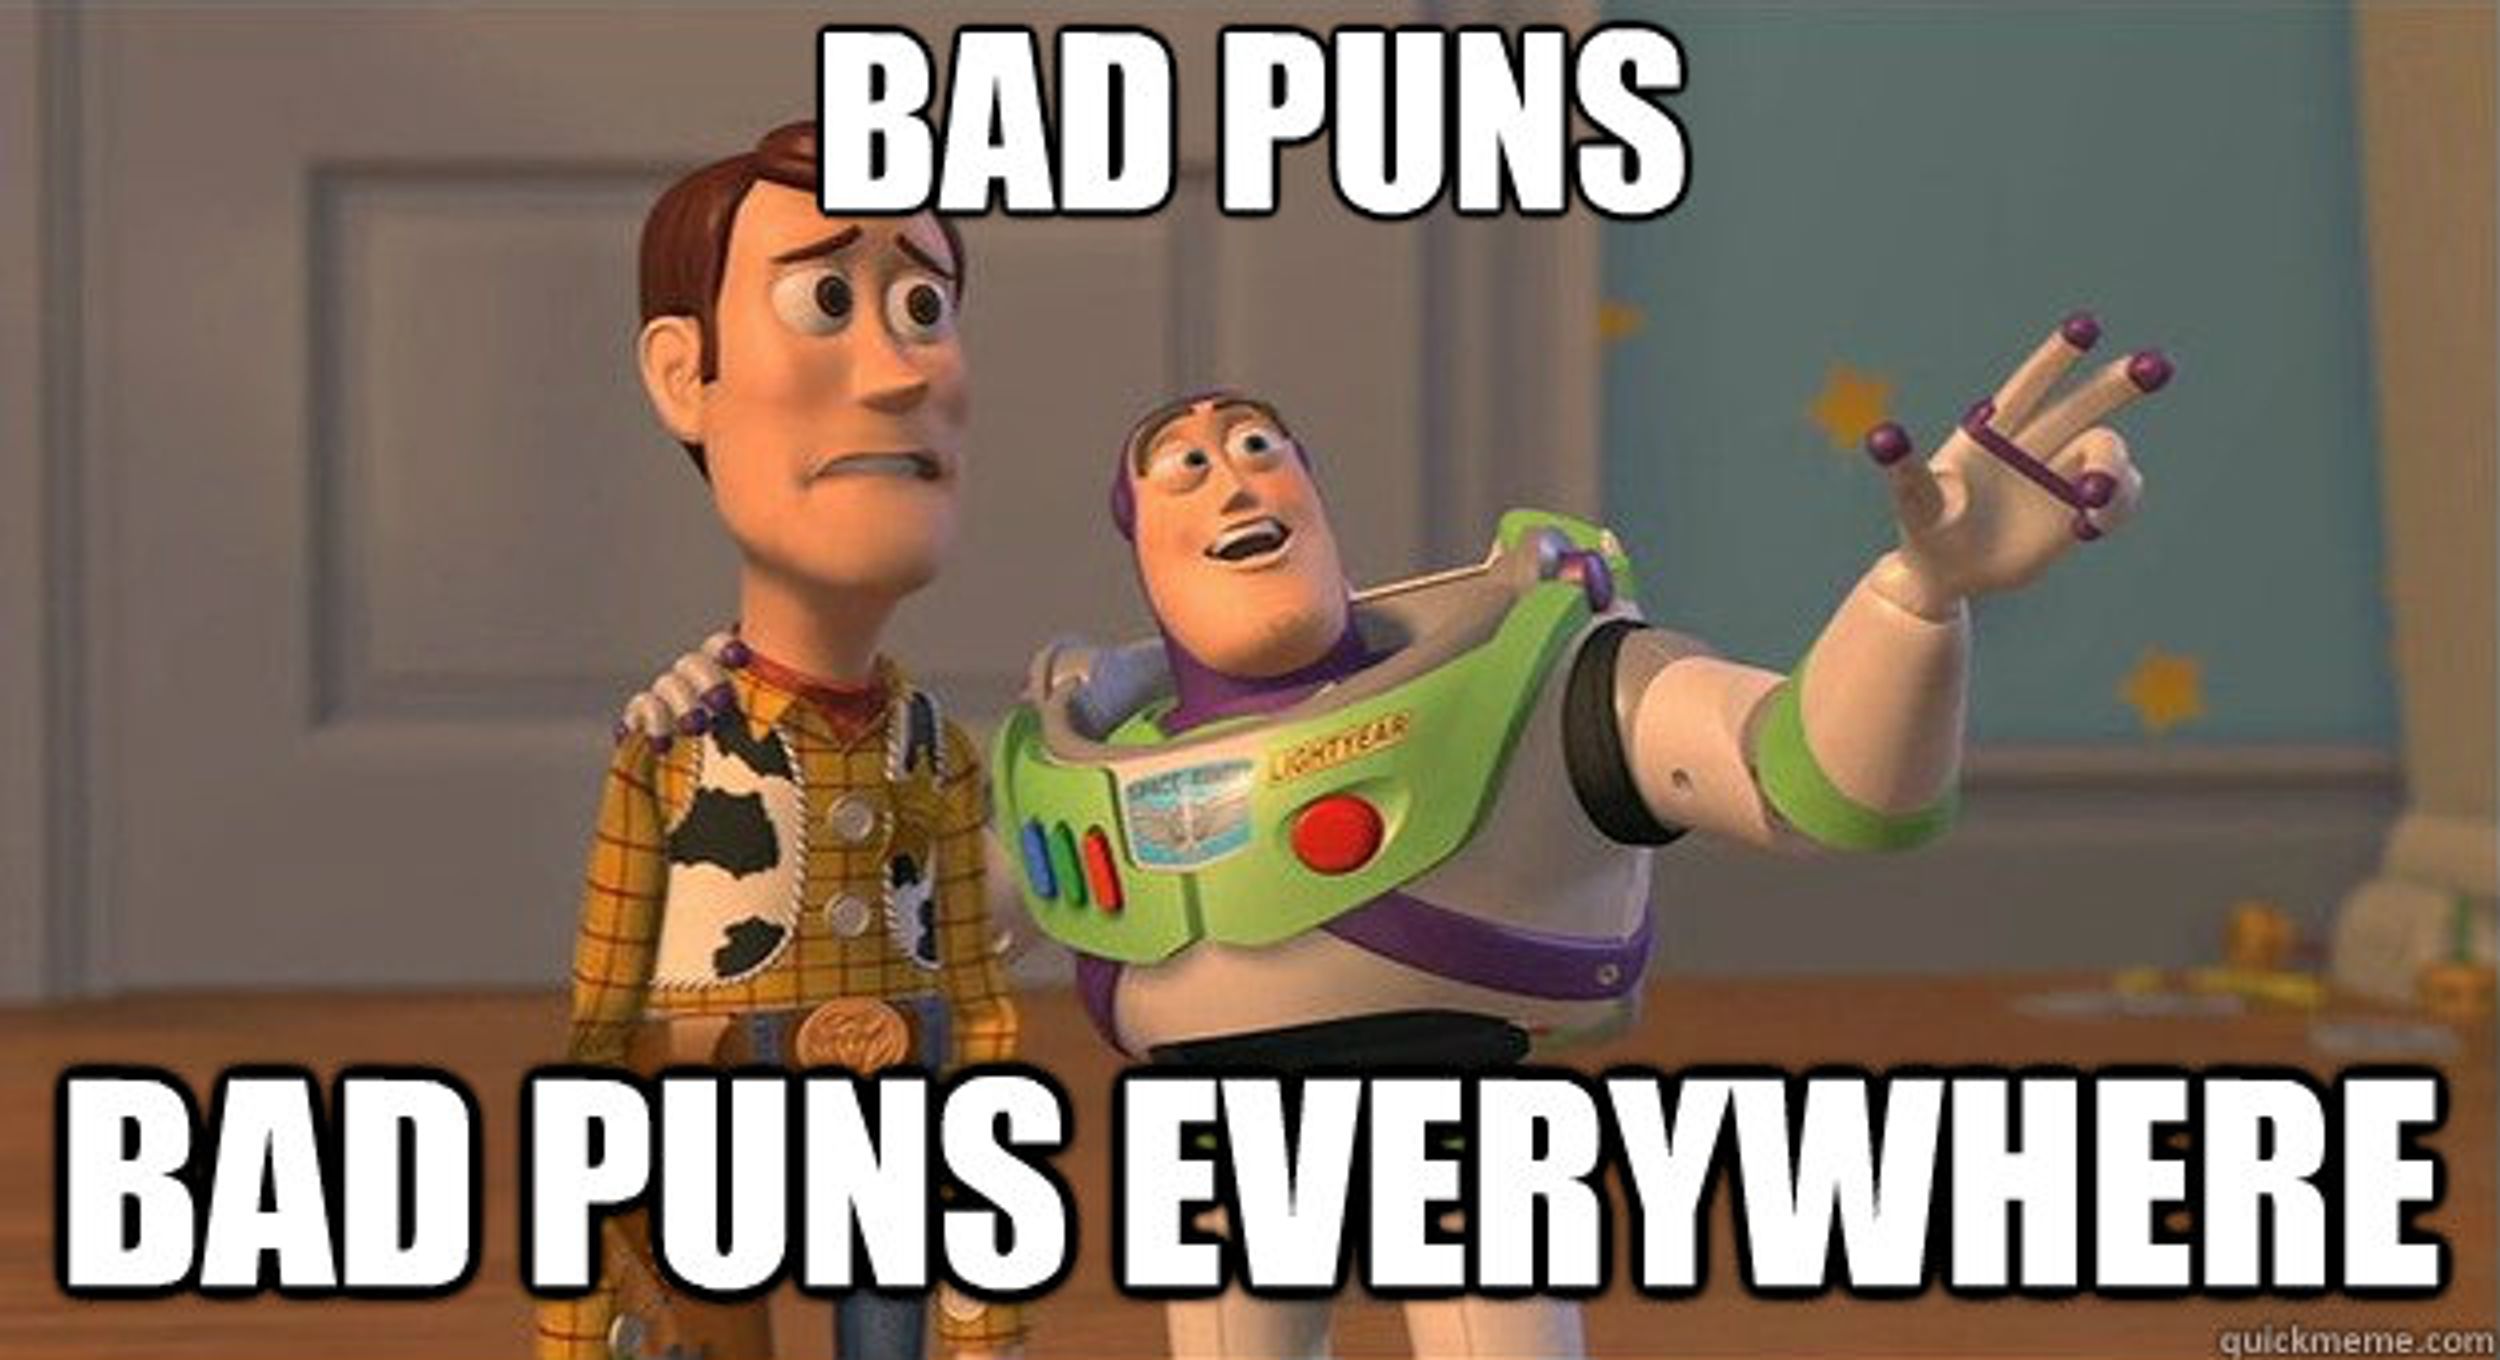 13 Awful Puns to Get You Through the Week